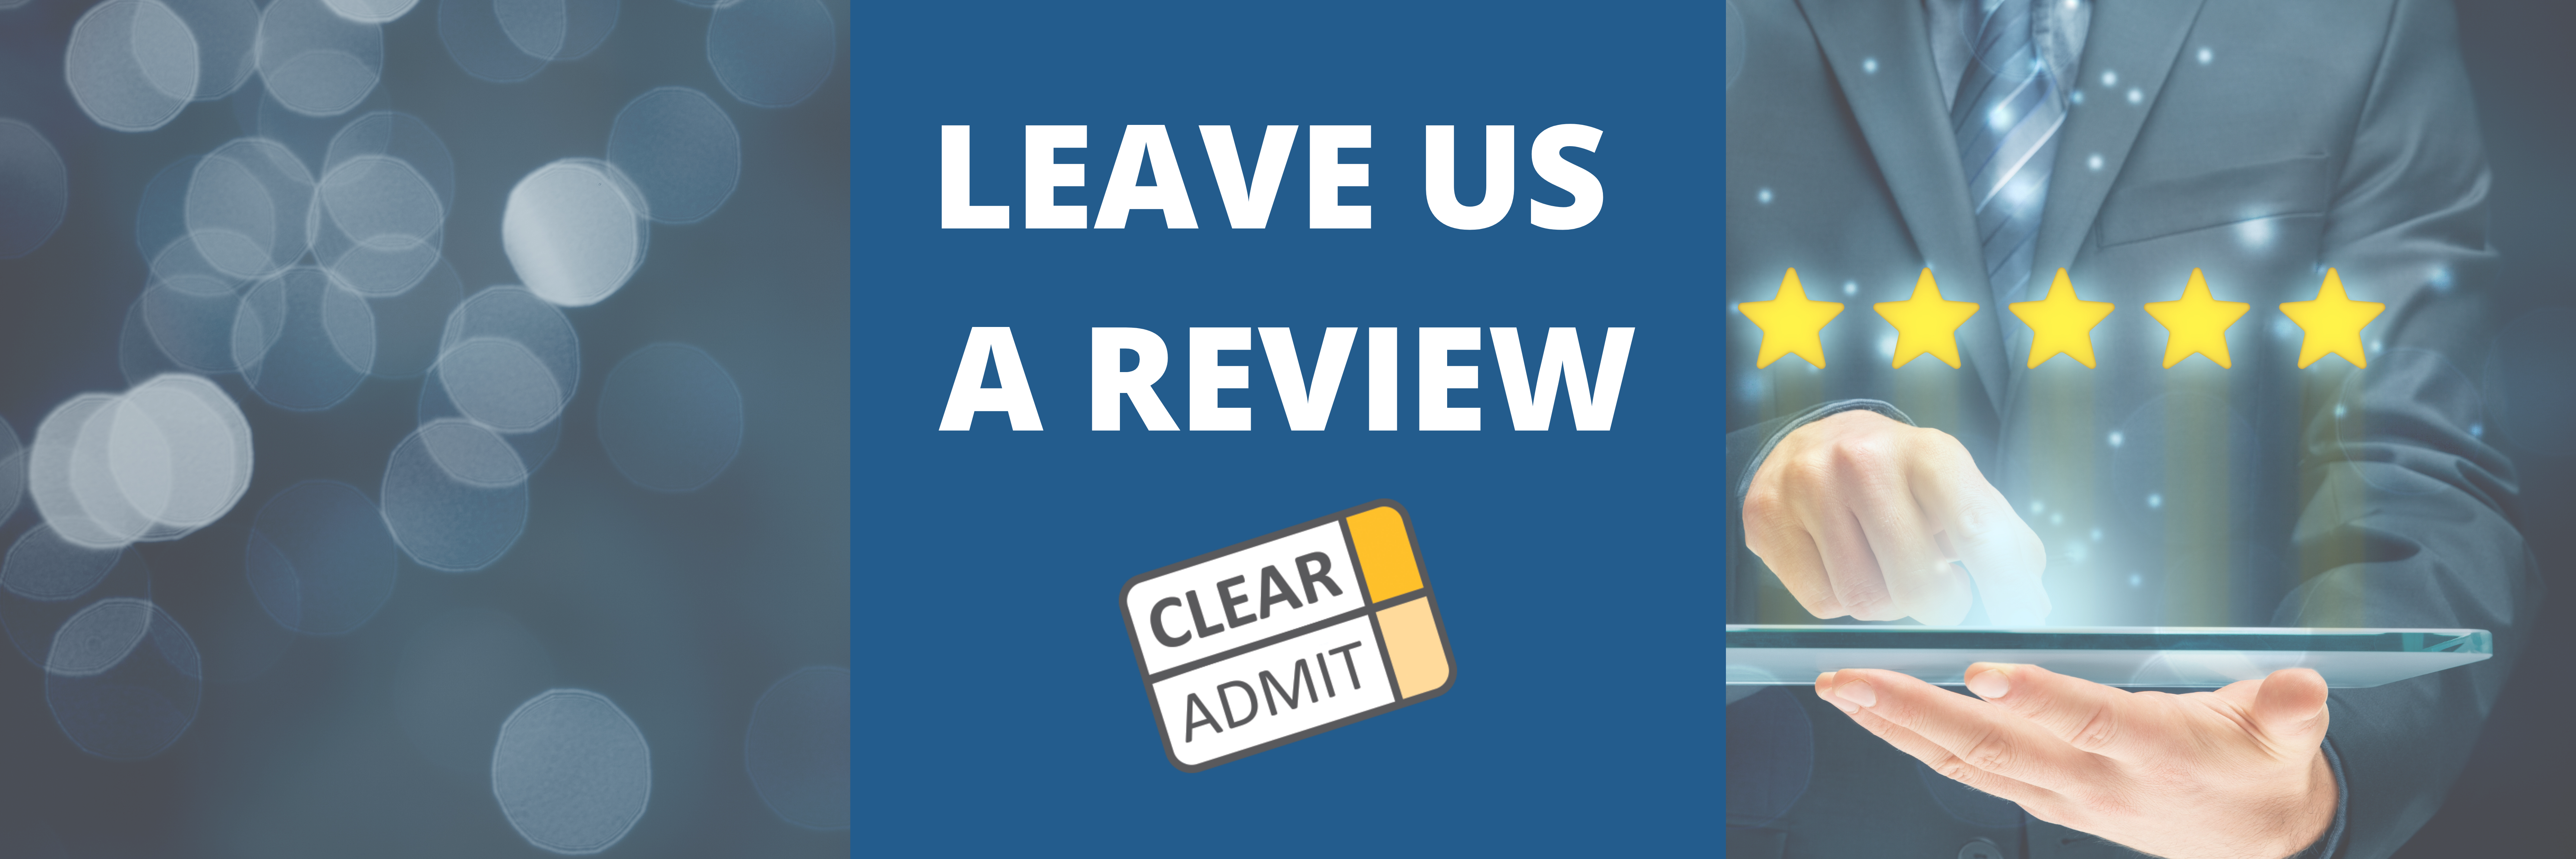 Image for Clear Admit Reviews and Ratings: Share Your Thoughts!